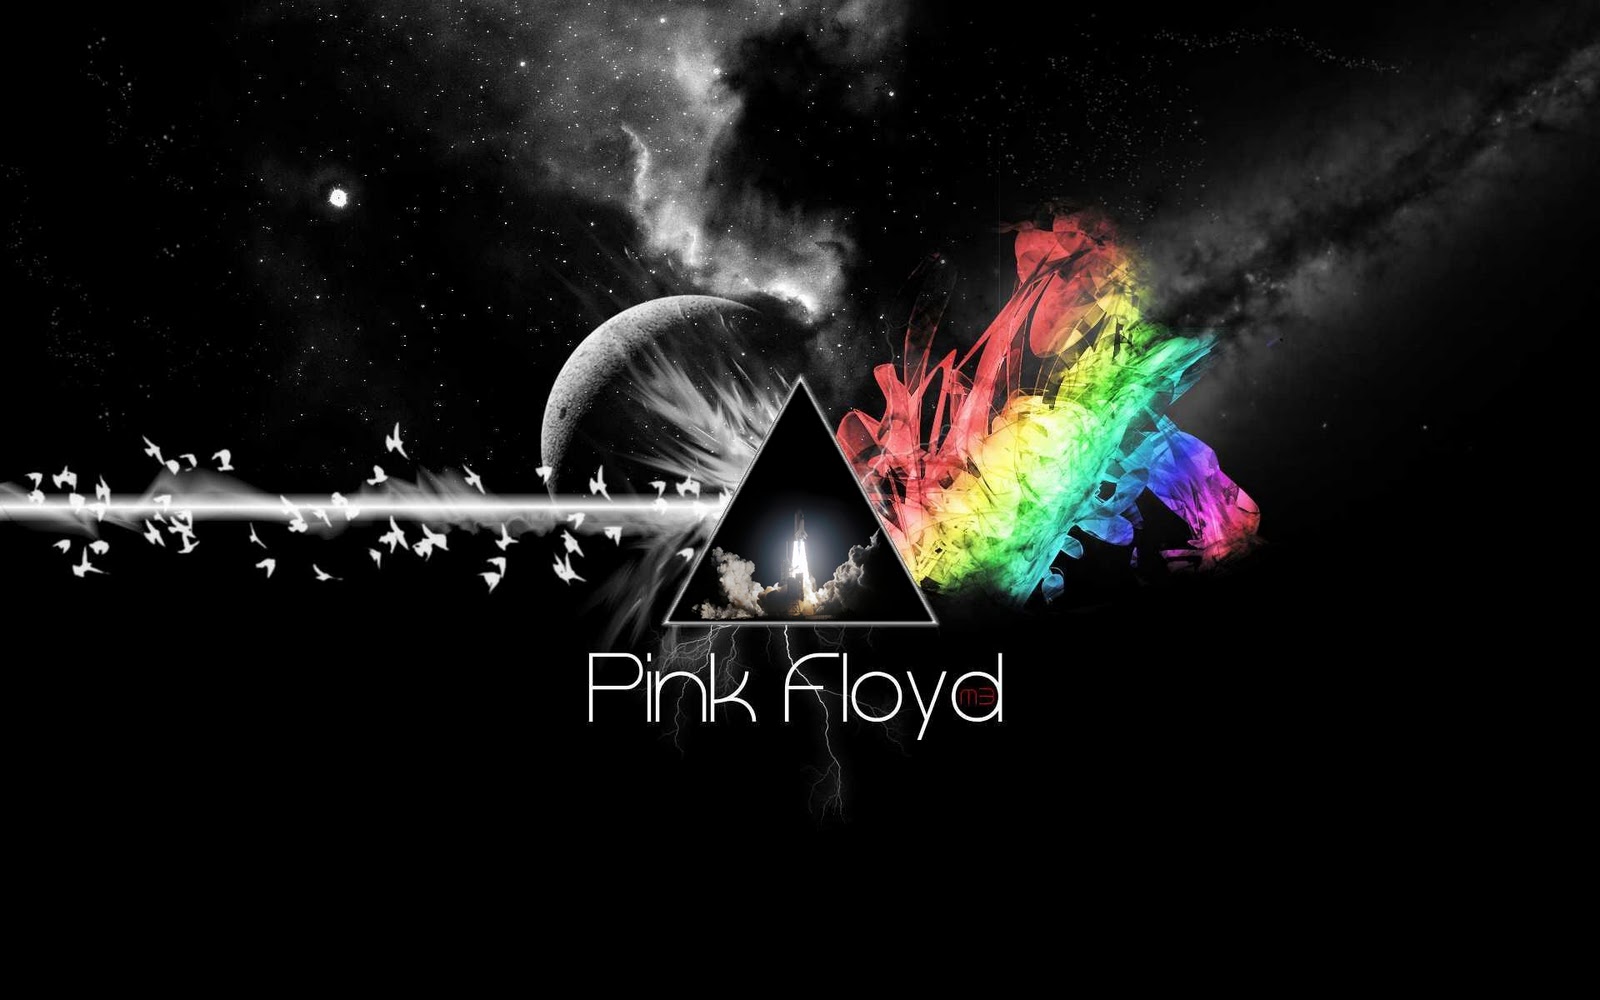 Rock of Ages: Pink Floyd - Wish you were here